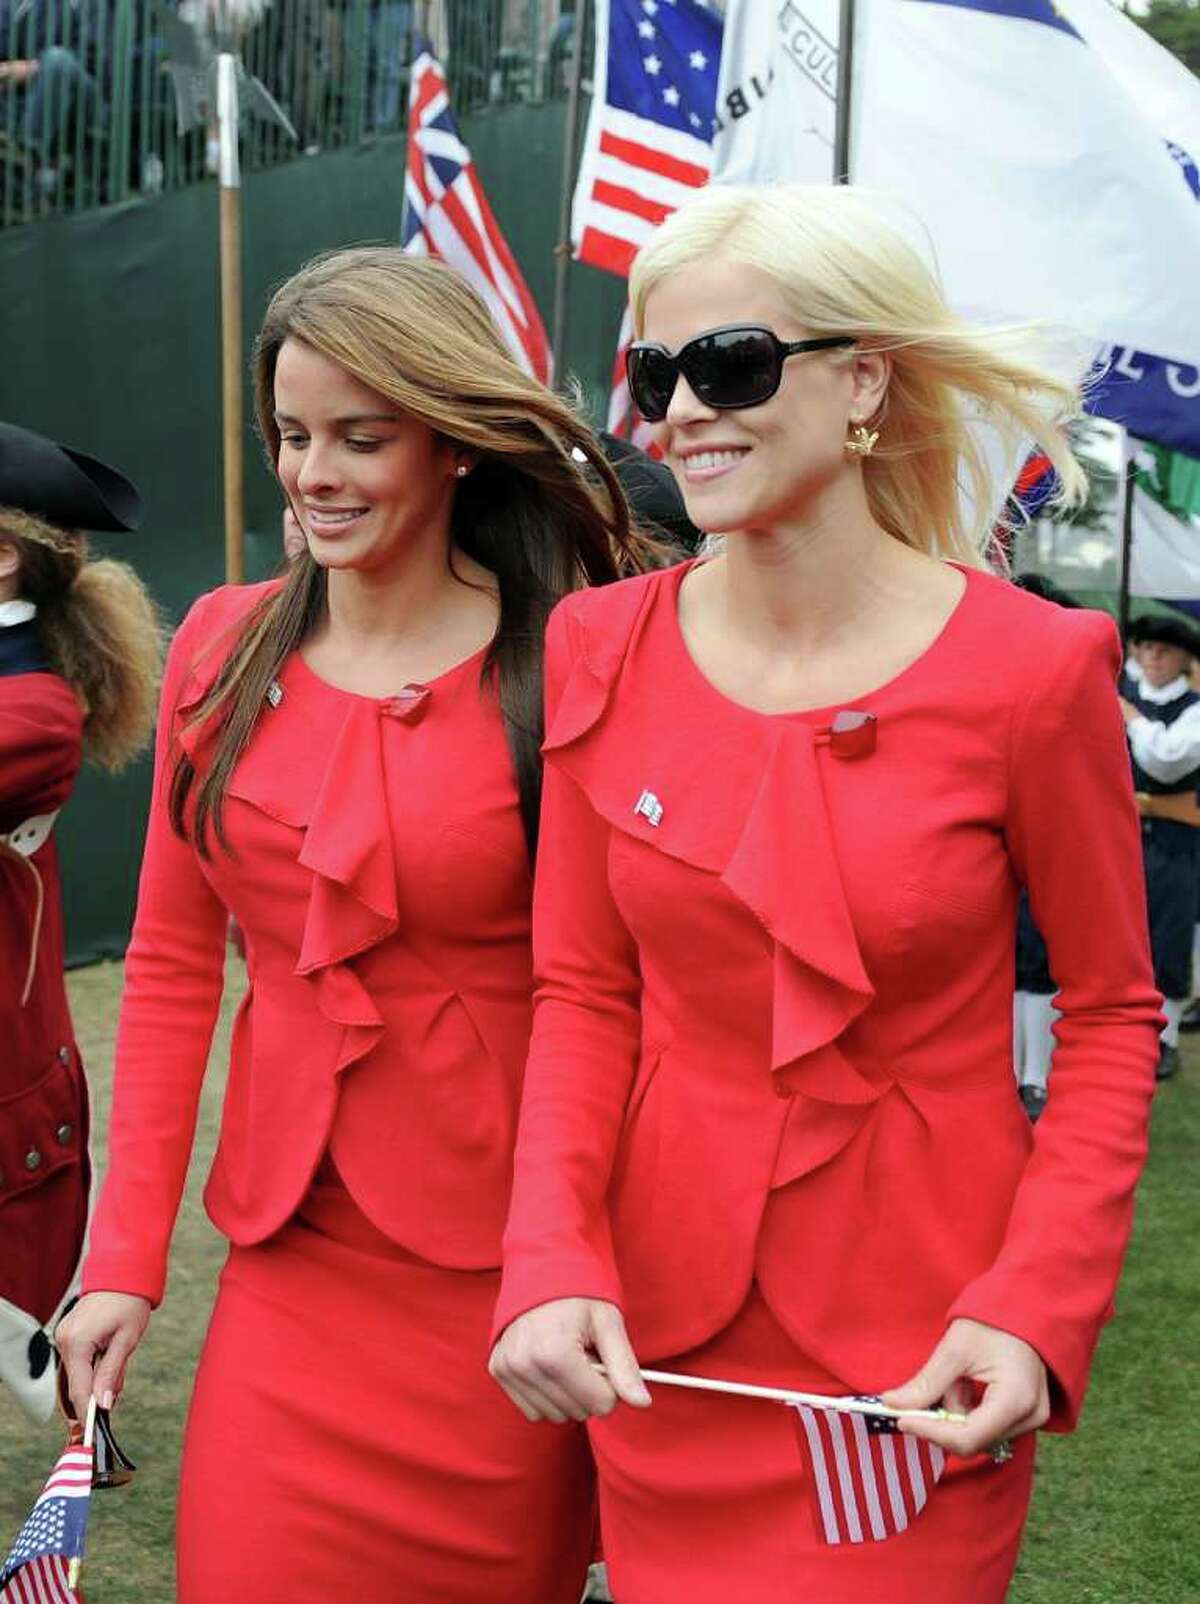 Elin Woods and Yvette Prieto make their way to their seats during Opening Ceremony of The Presidents Cup at Harding Park Golf Course on October 7, 2009 in San Francisco, California.